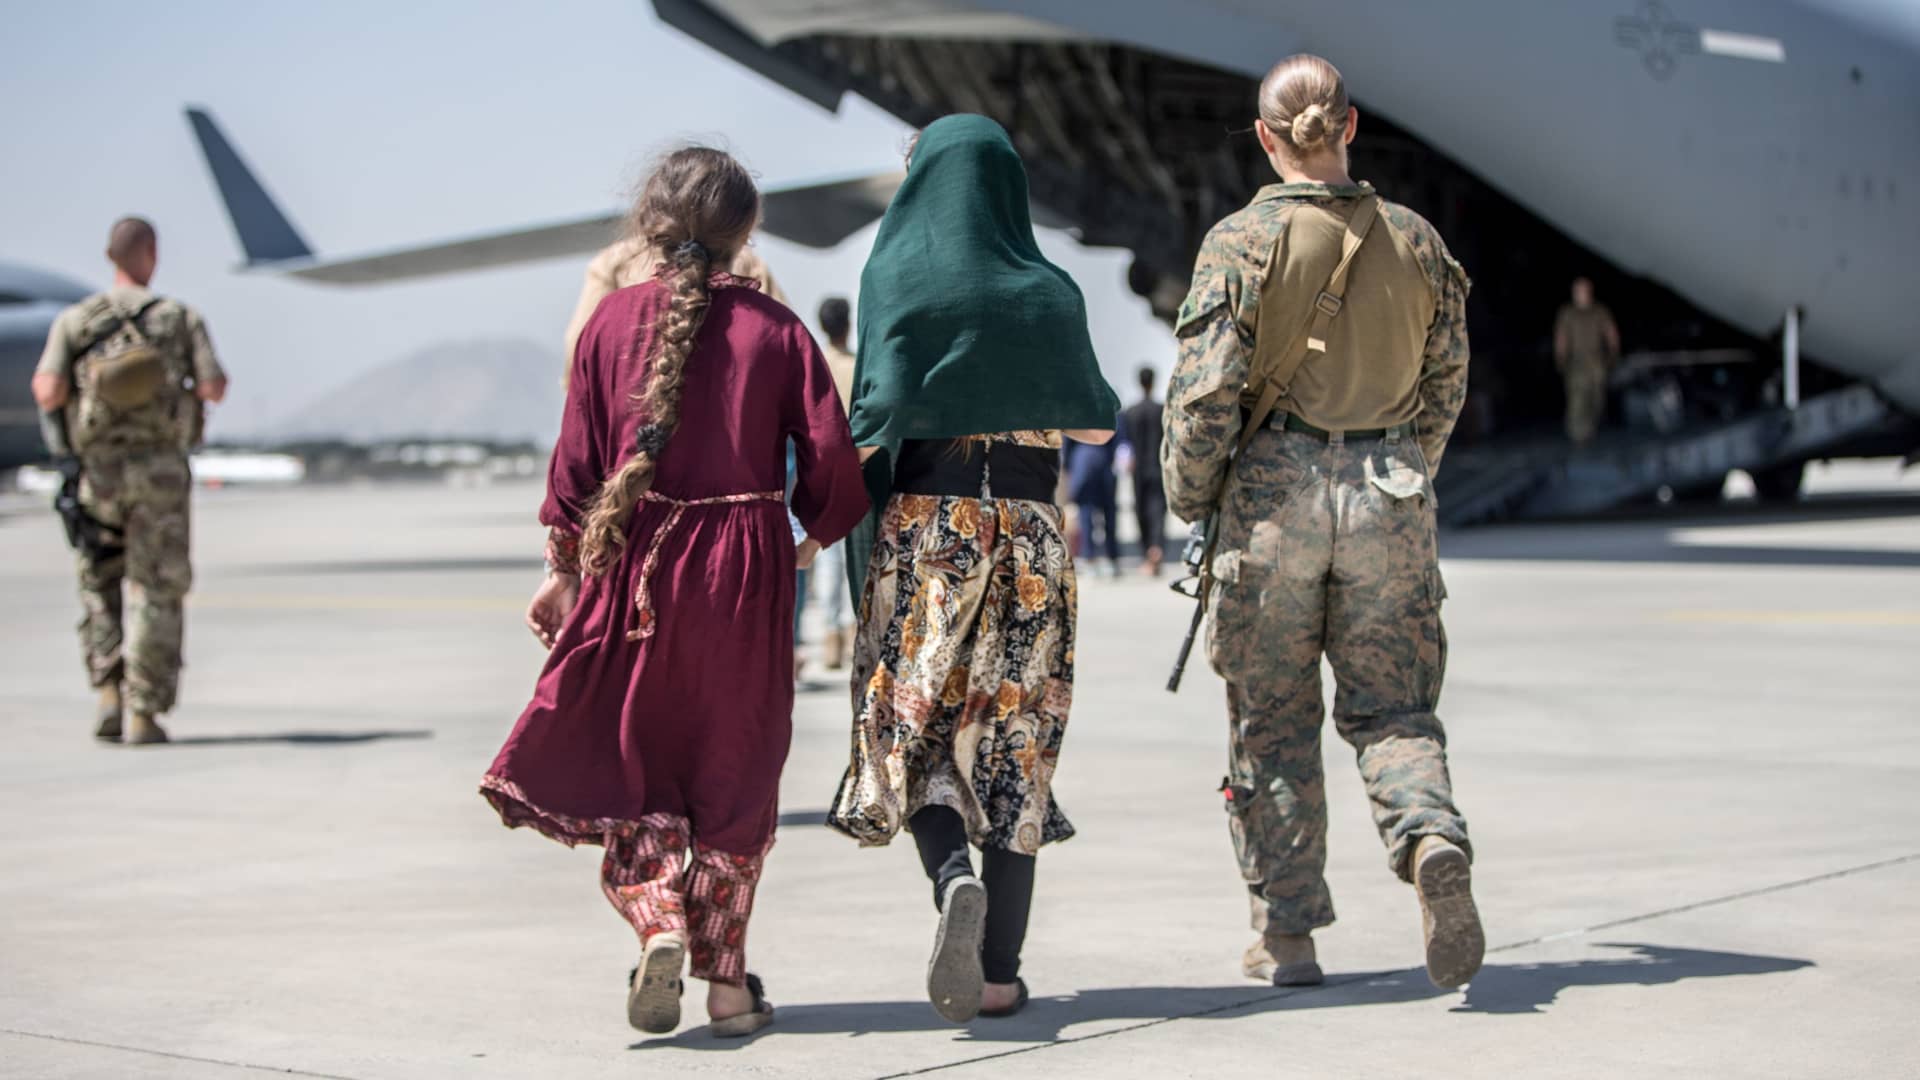 A Marine with the 24th Marine Expeditionary Unit walks with the children during an evacuation at Hamid Karzai International Airport in Kabul, Afghanistan, August 24, 2021.